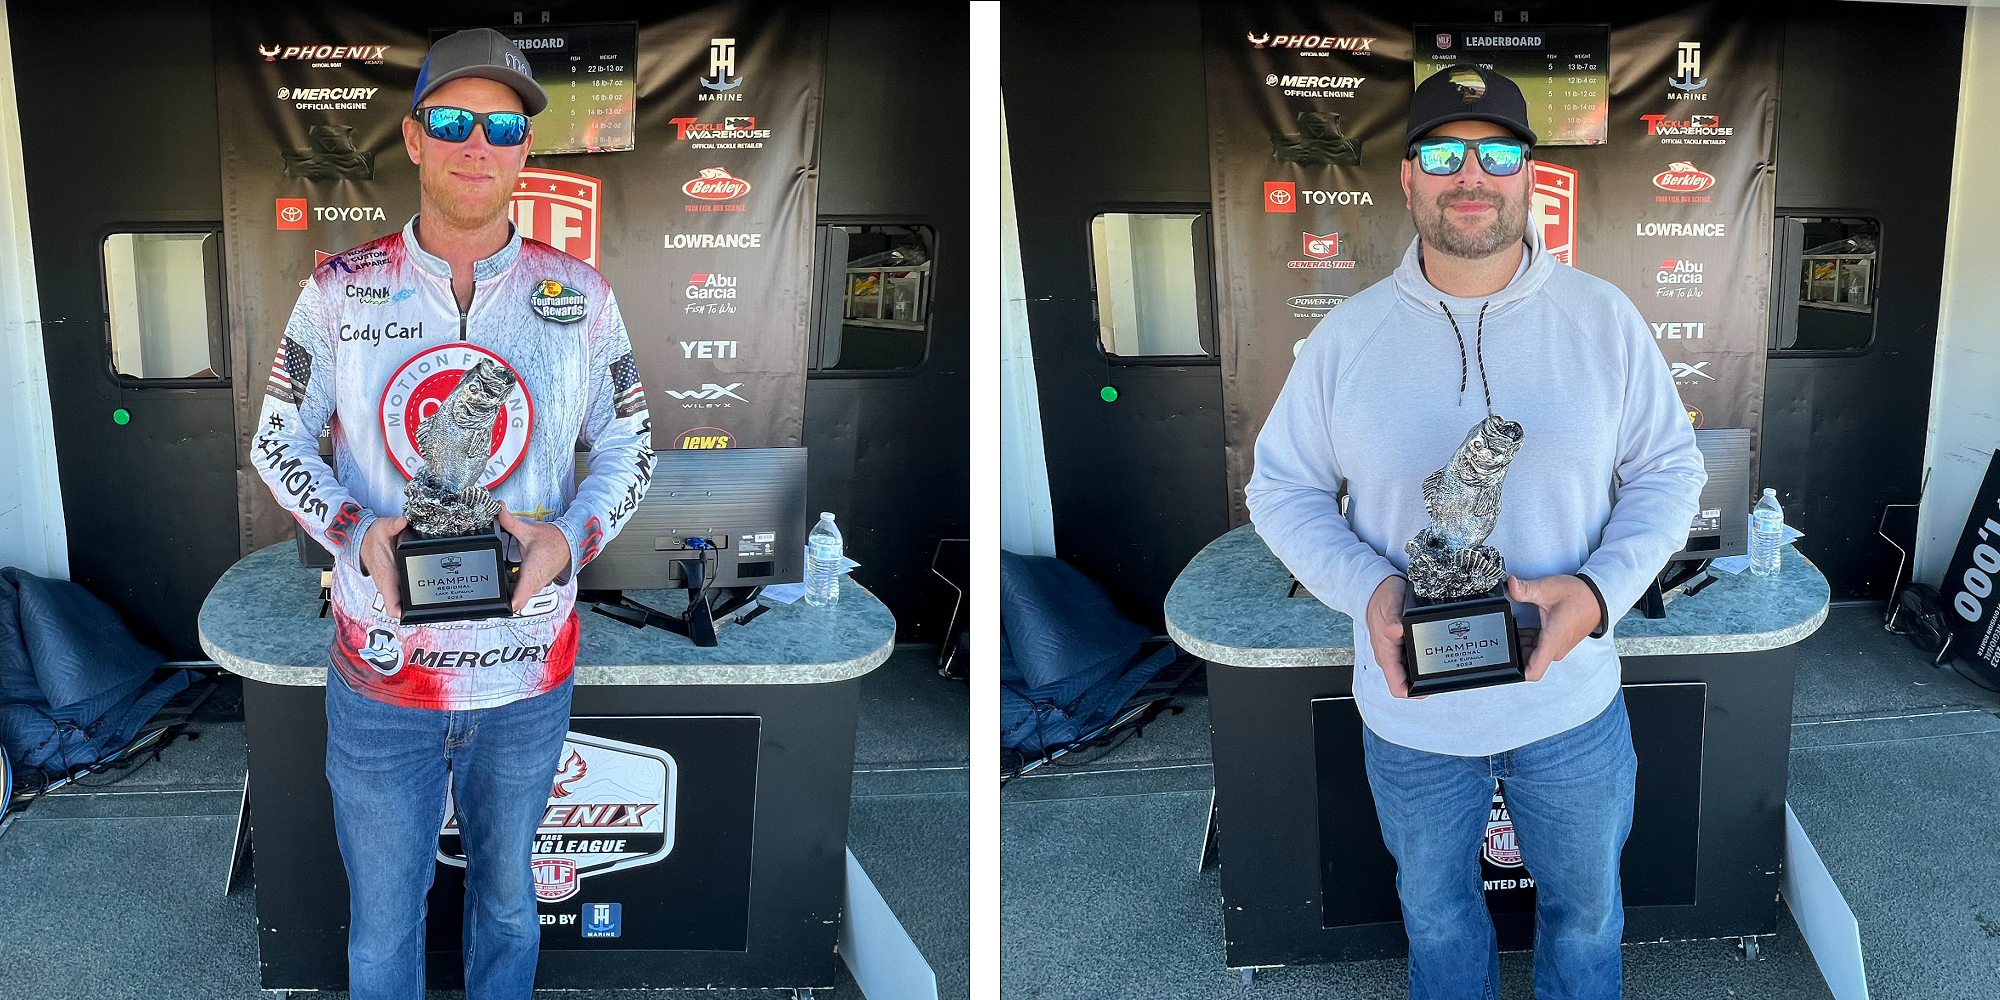 Carl wins Eufaula Regional by more than 8 pounds off one magic